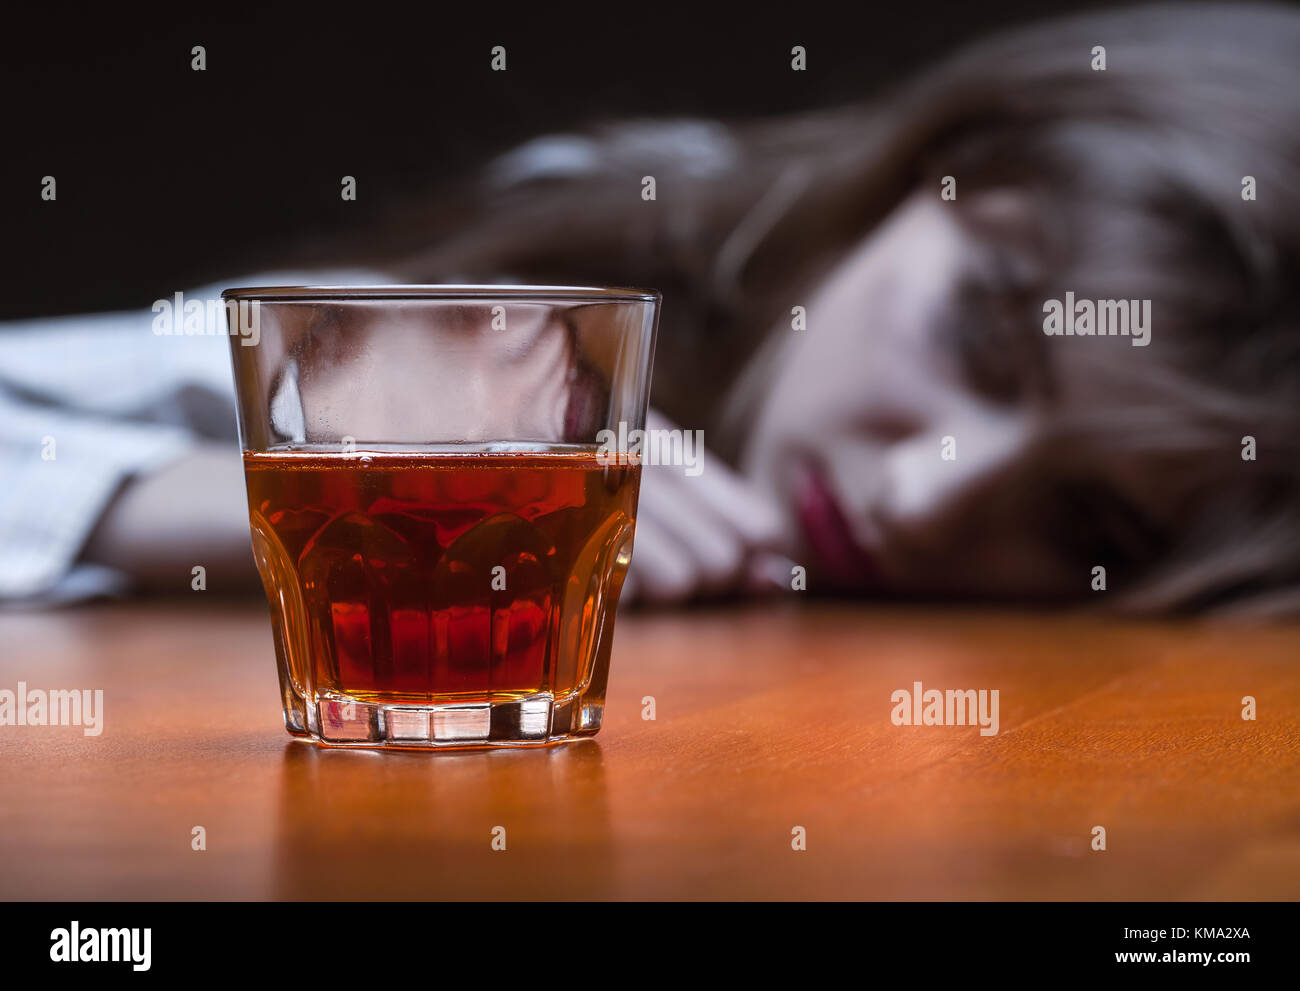 Young woman in depression, drinking alcohol on dark background. Focus on the glass Stock Photo